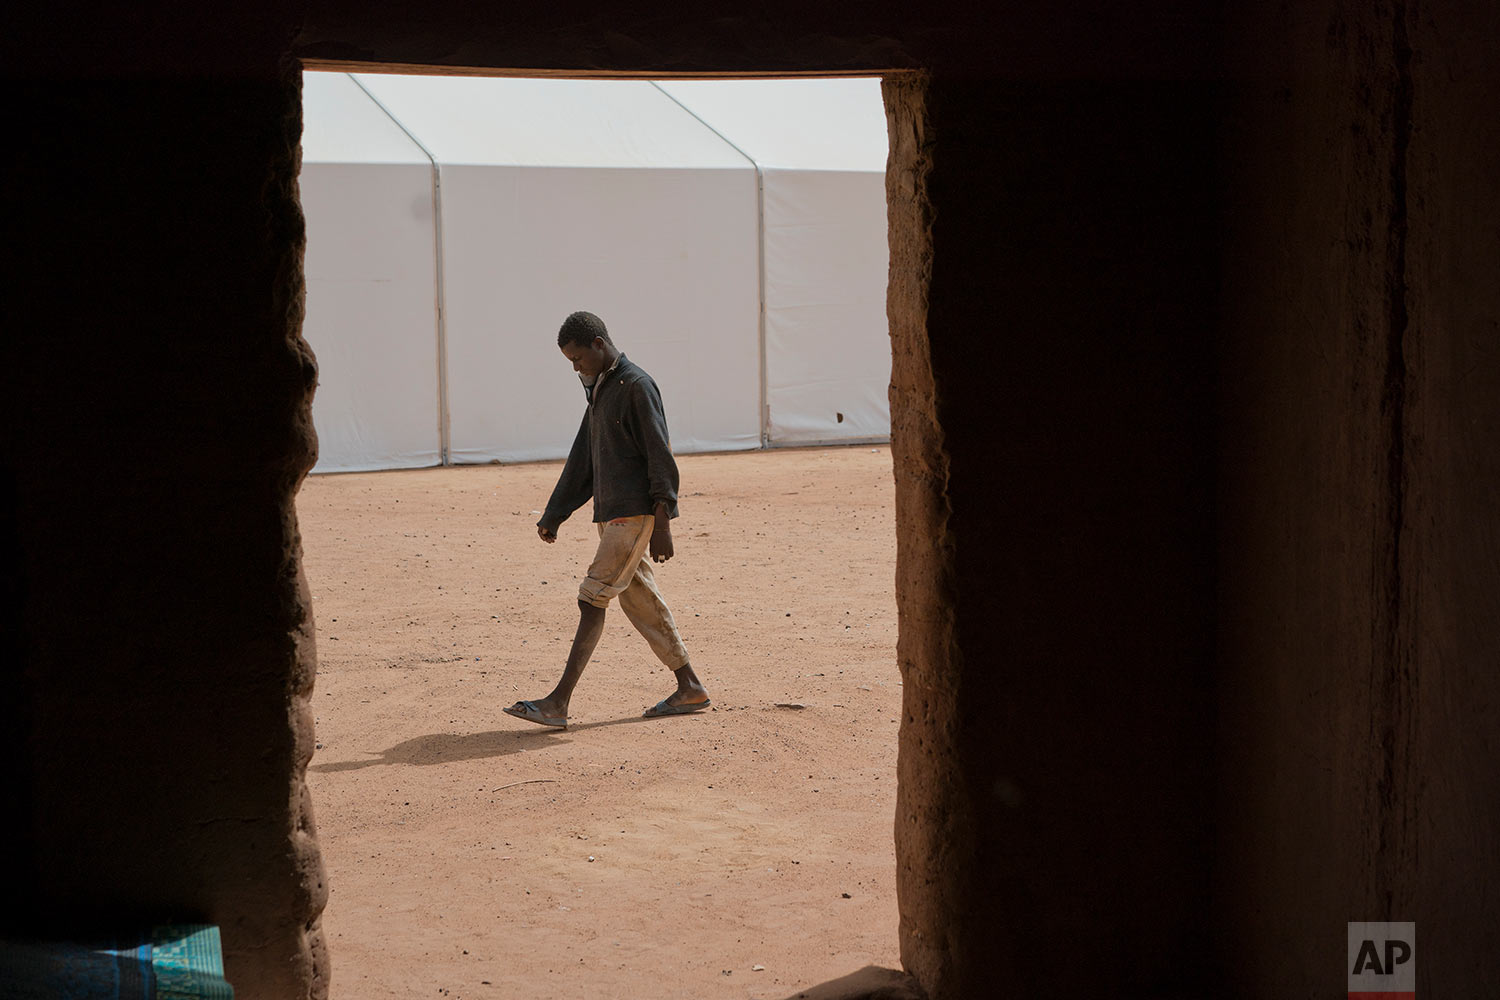  A young migrant who has been expelled from Algeria paces in a transit center in Arlit, Niger, on June 1, 2018. (AP Photo/Jerome Delay) 